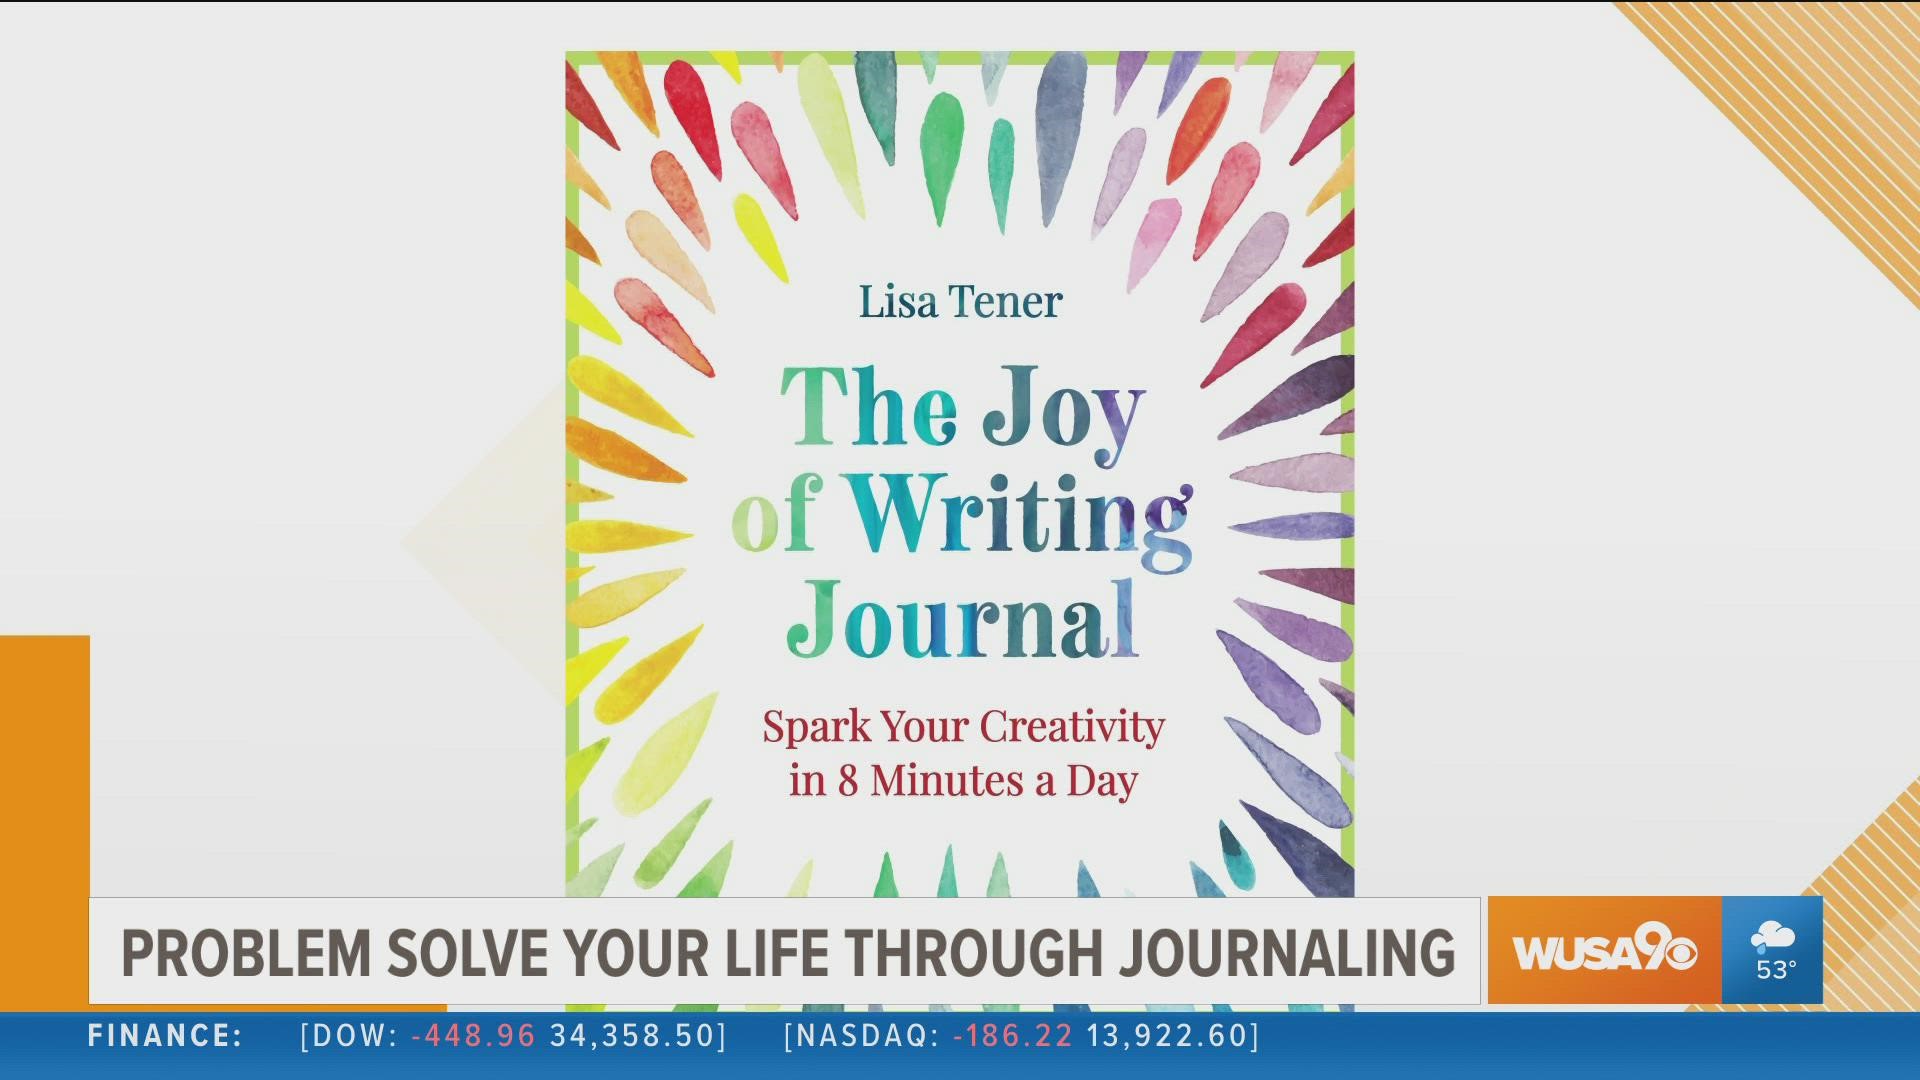 Lisa Tener, author and book coach shares how to use journaling to make the life you want.